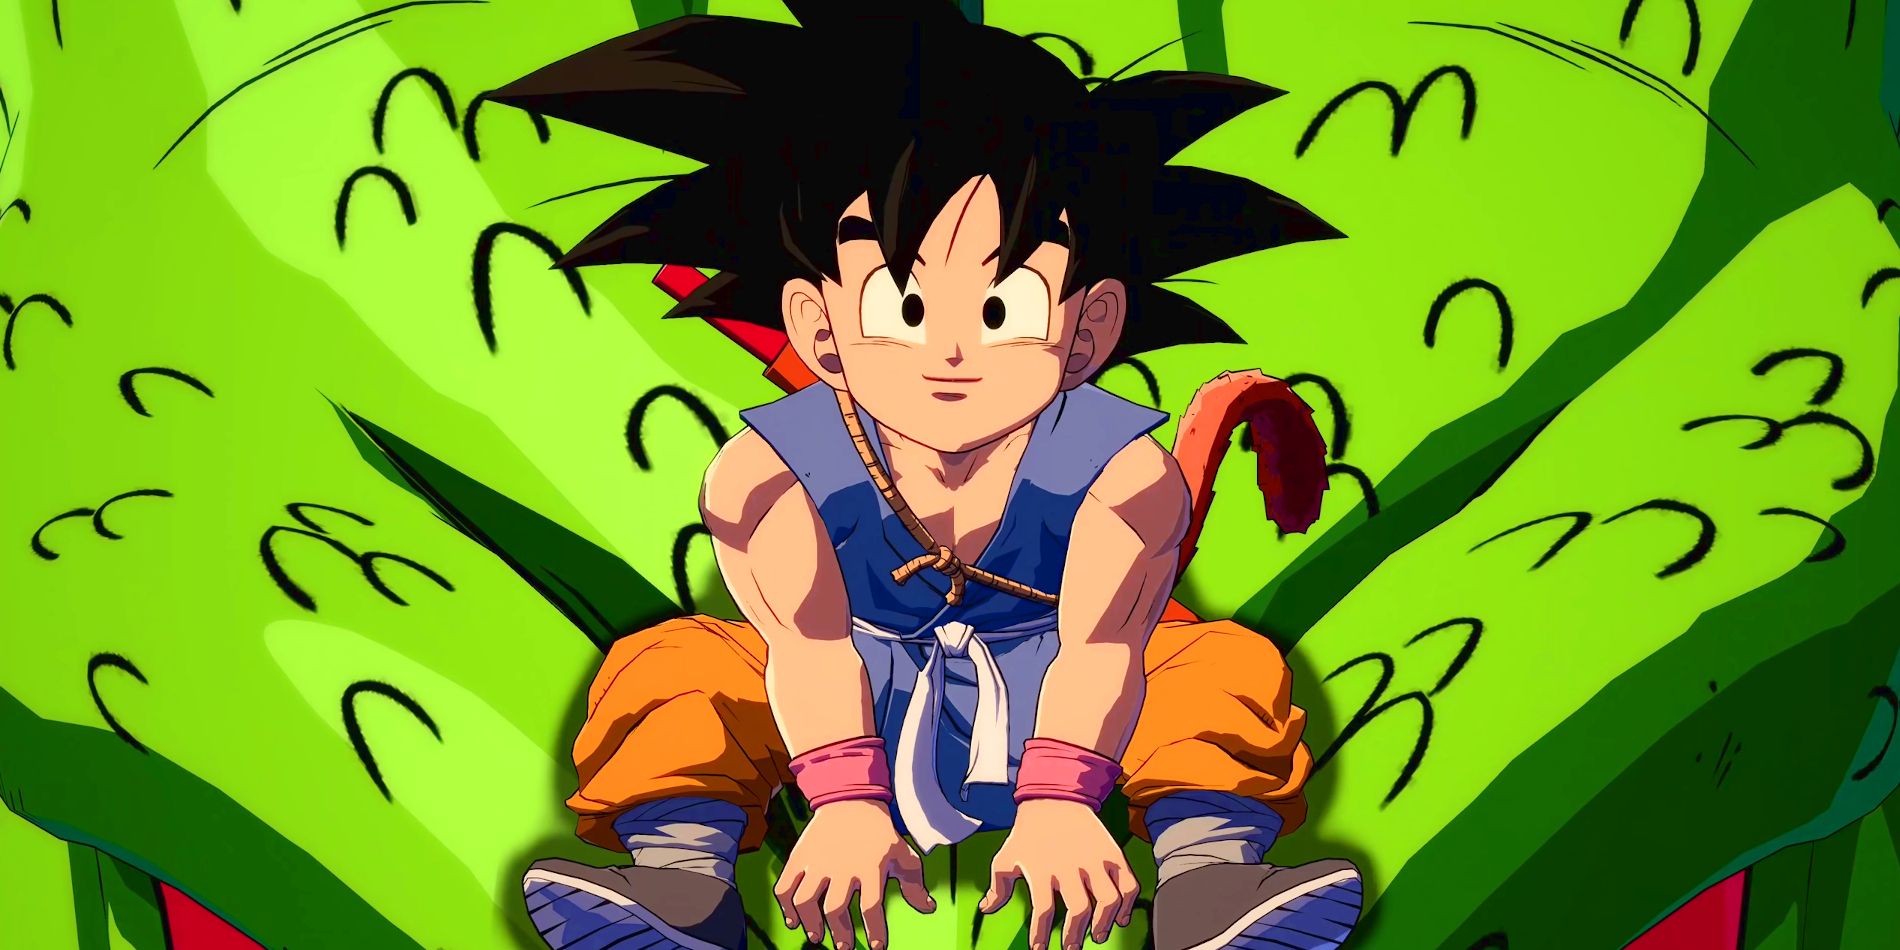 A young Goku is seen wearing his GT outfit while riding on Shenron's head and looking toward the camera.